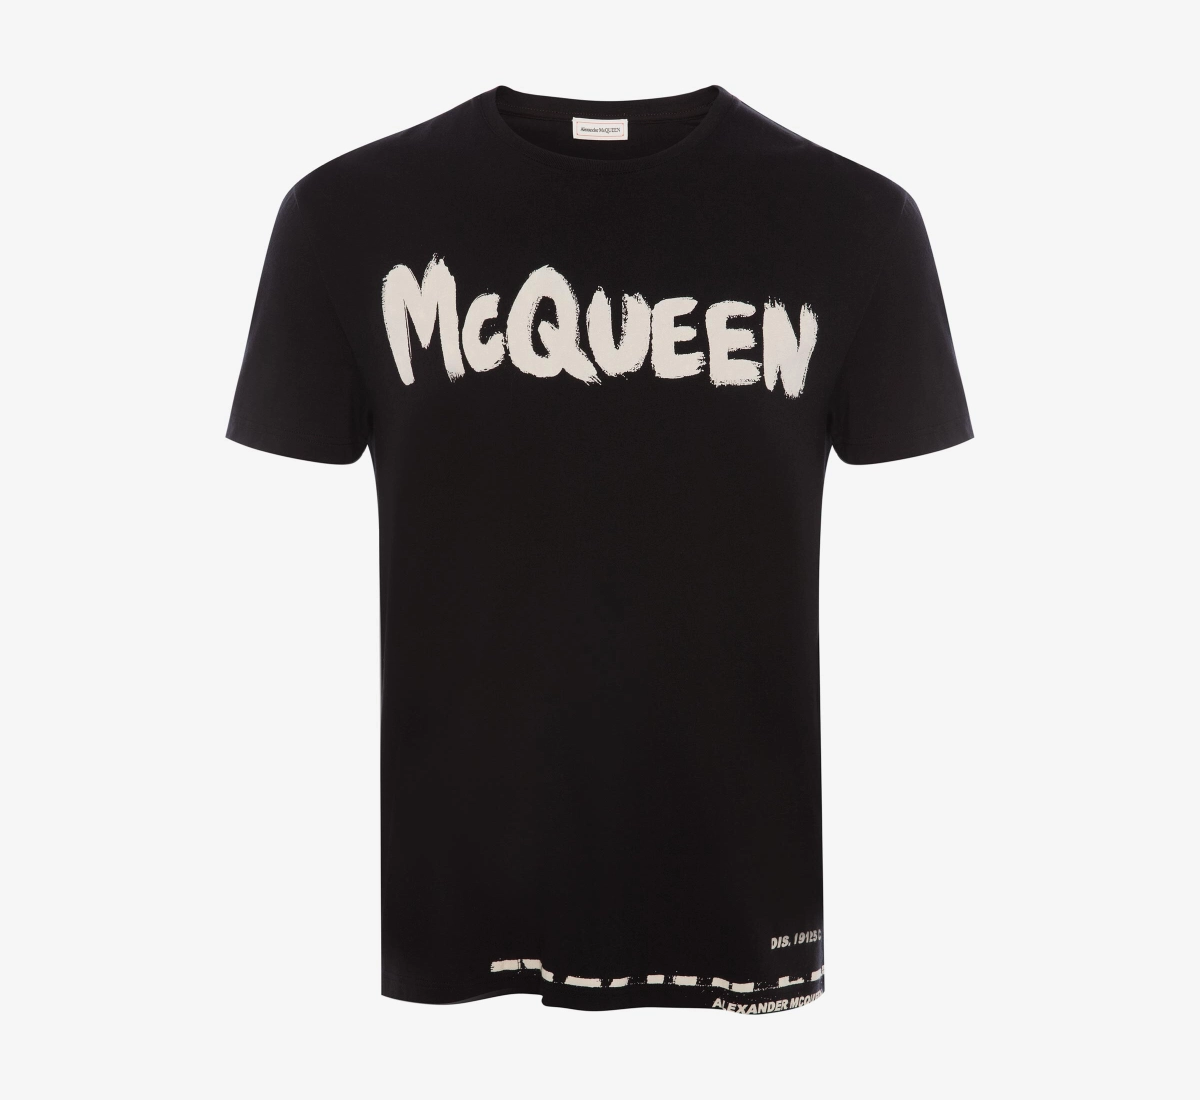 Where are Alexander McQueen T-shirts made